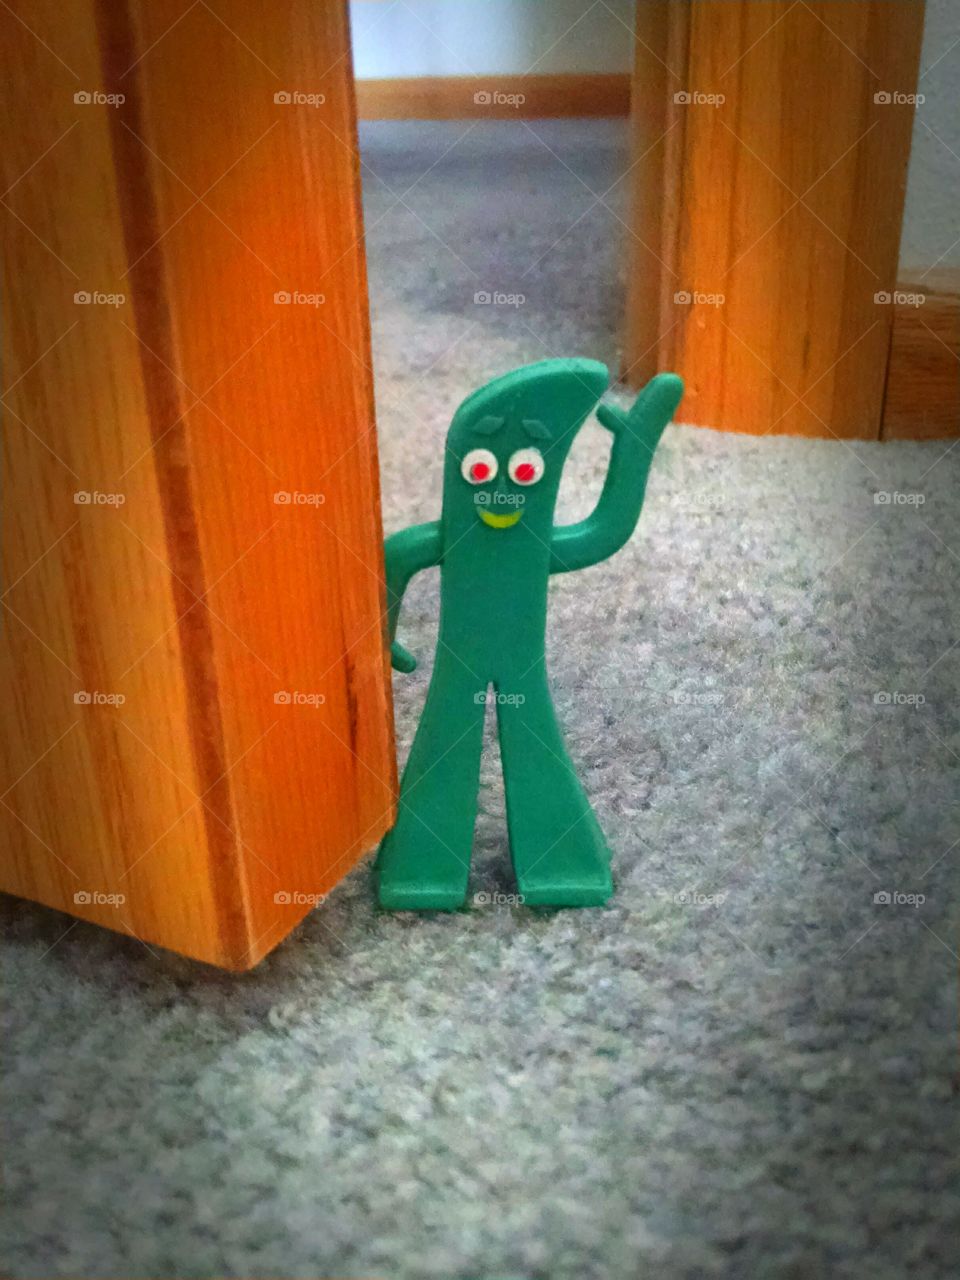 Gumby your home!